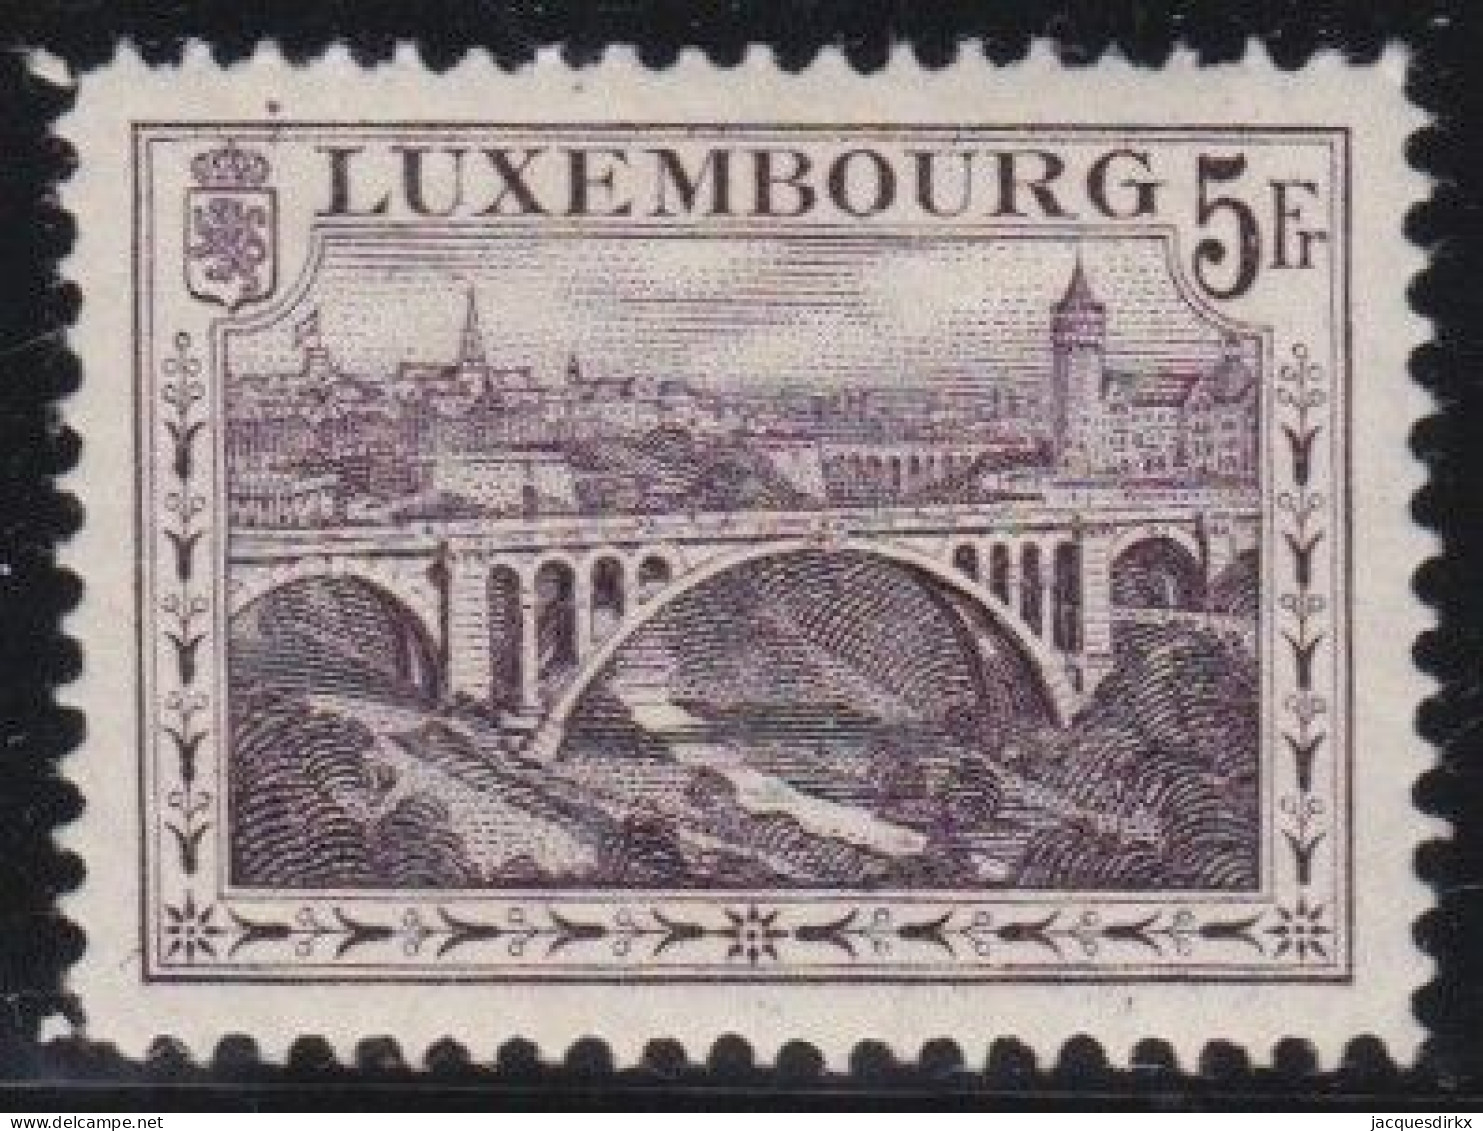 Luxembourg    .   Y&T     .    134  . Perf.  12½x12½     .    **   .      Neuf Avec Gomme Et SANS Charnière - 1914-24 Maria-Adelaide